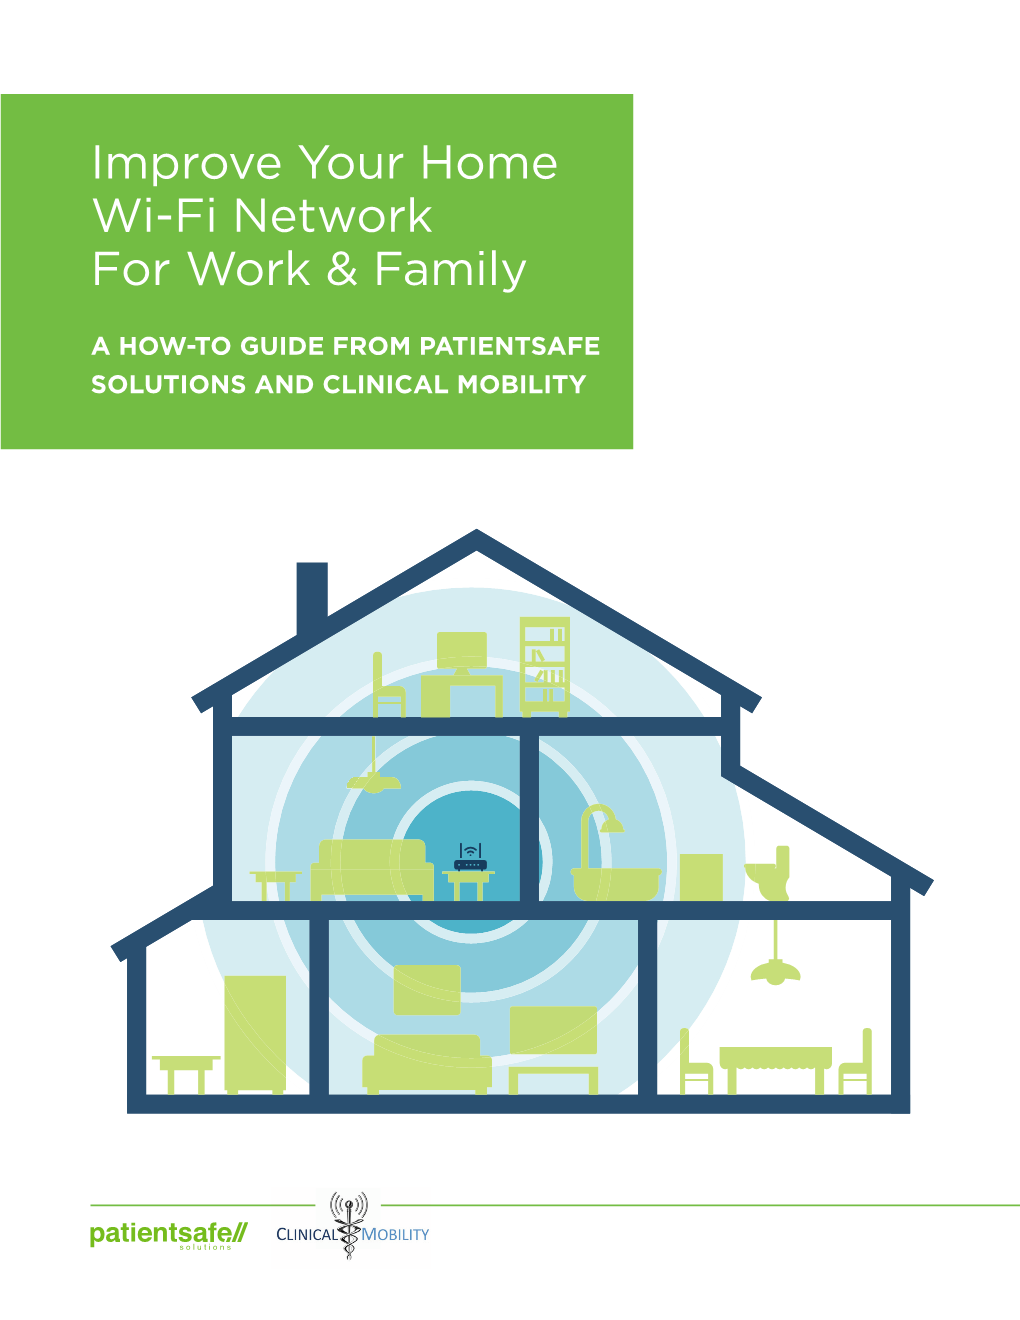 Improve Your Home Wi-Fi Network for Work & Family